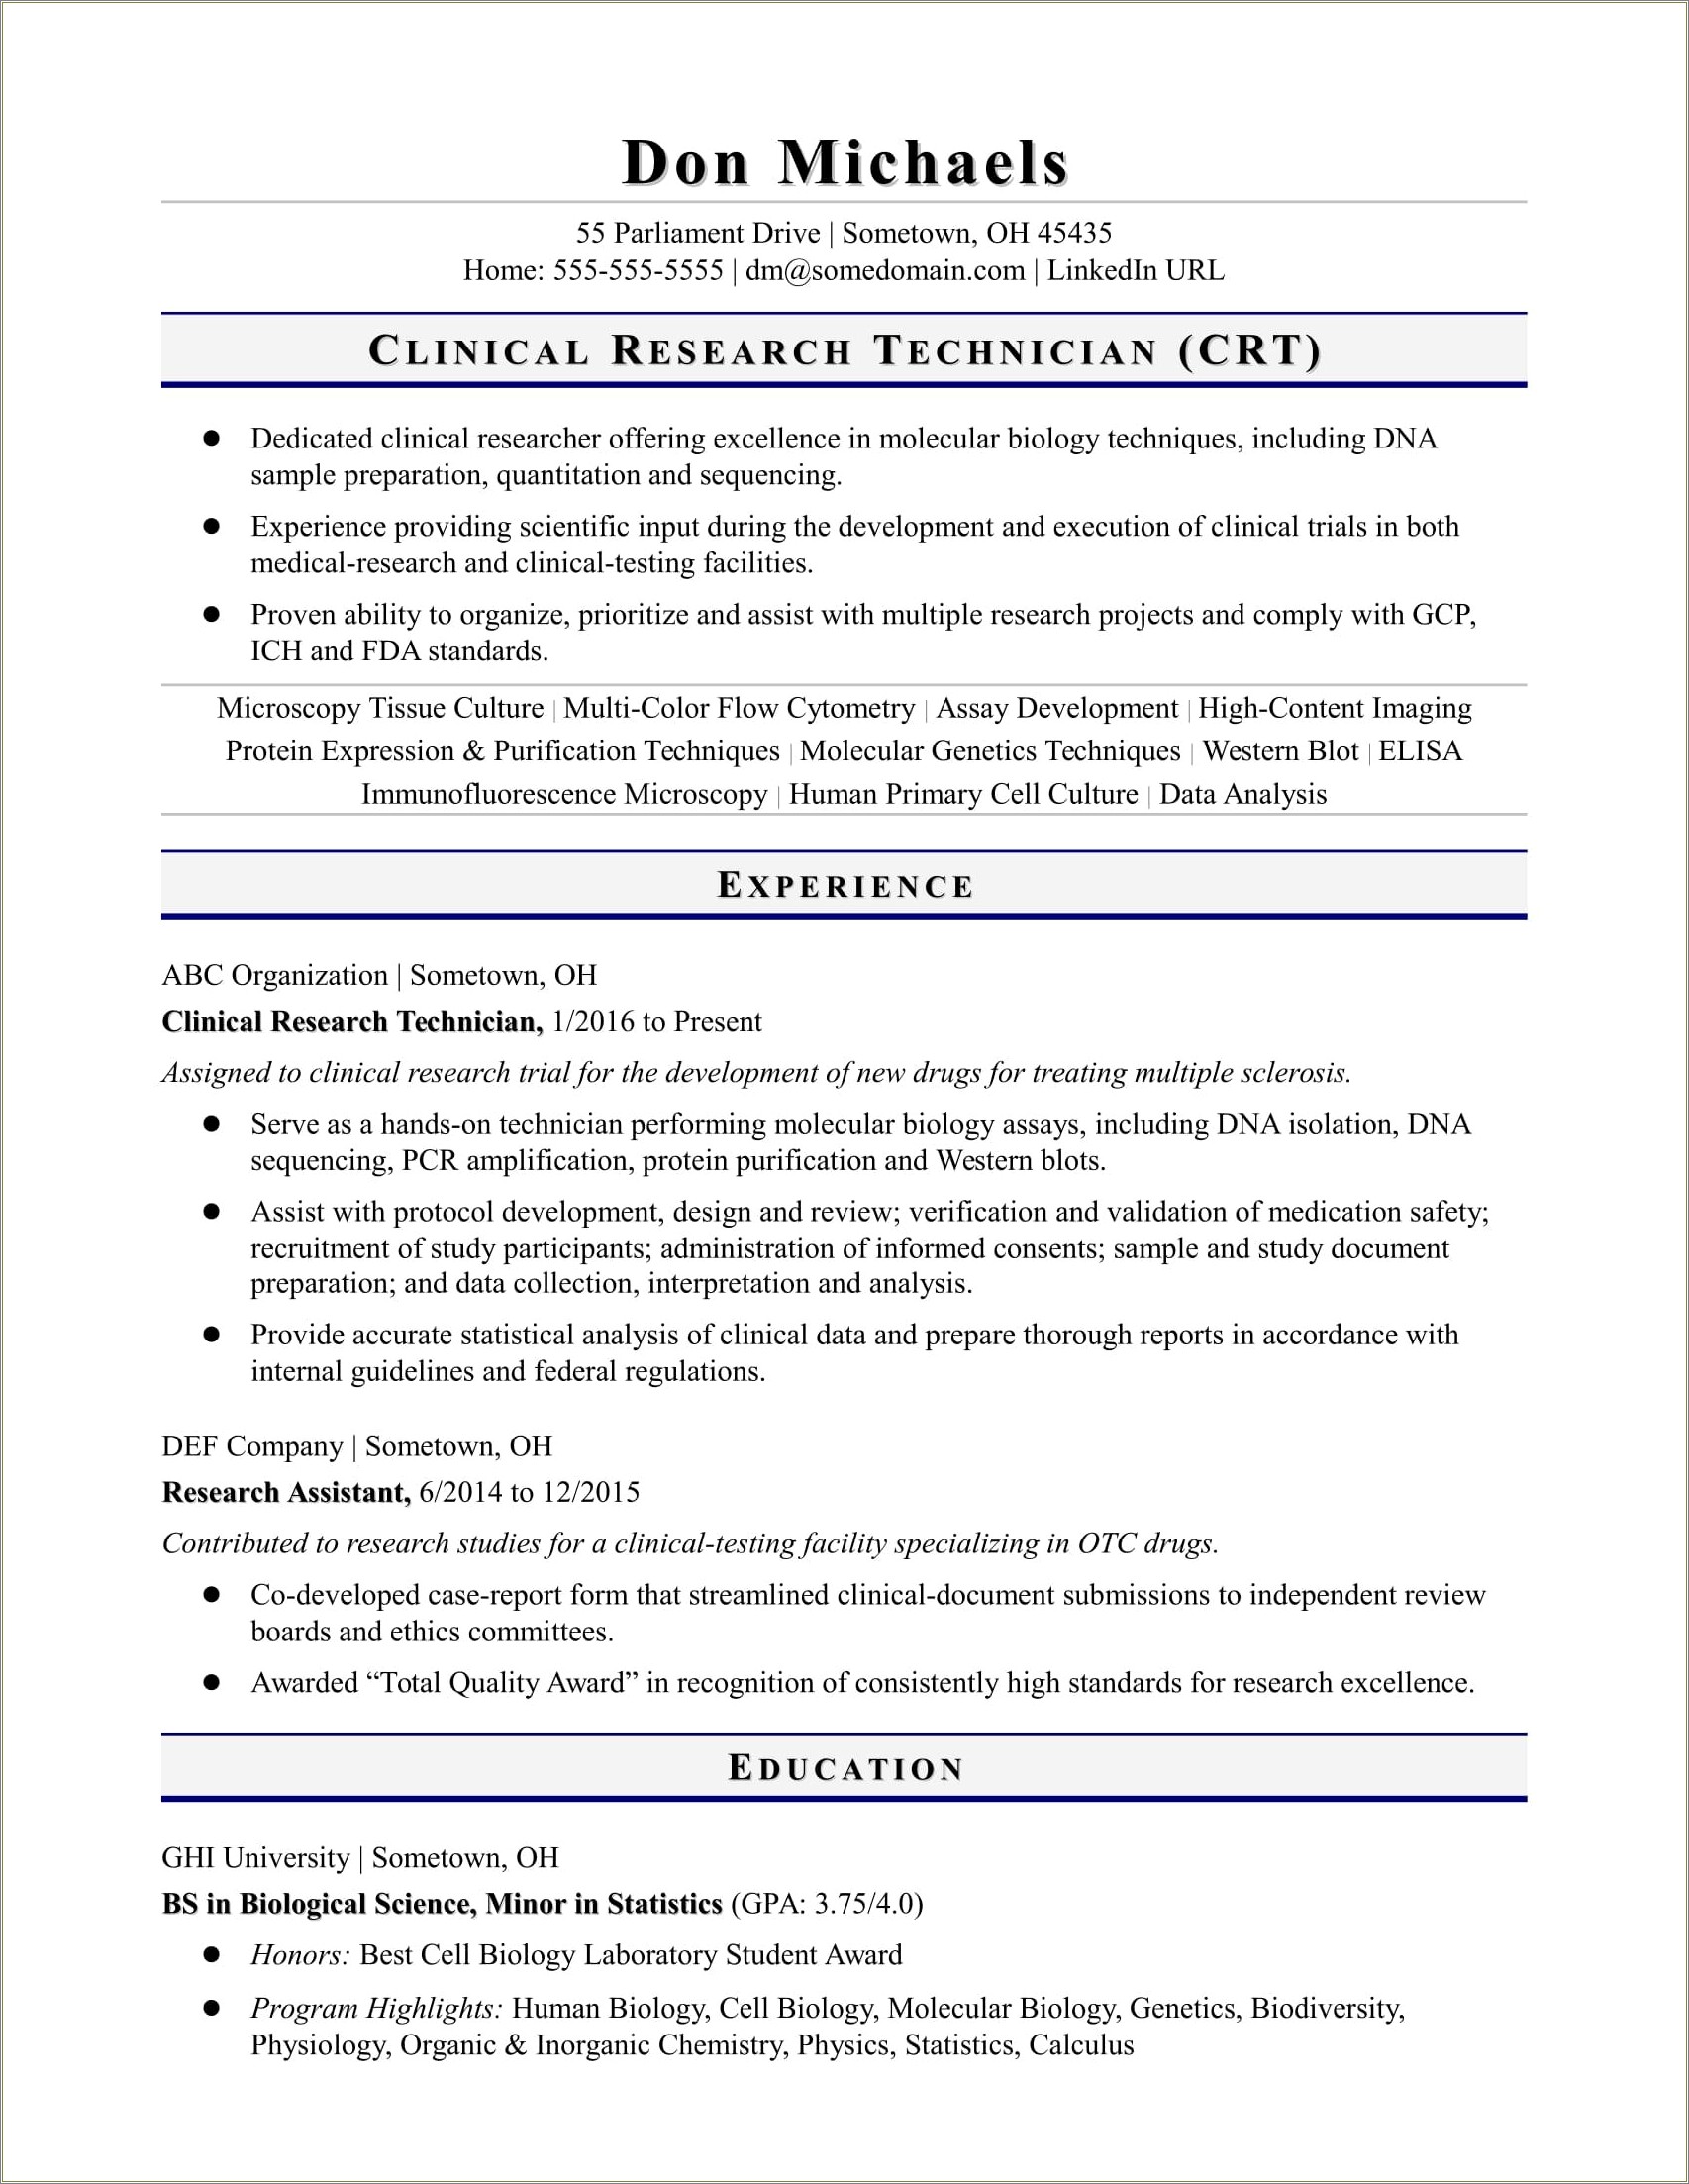 Independent Pharmaceutical Sales Rep Sample Resume